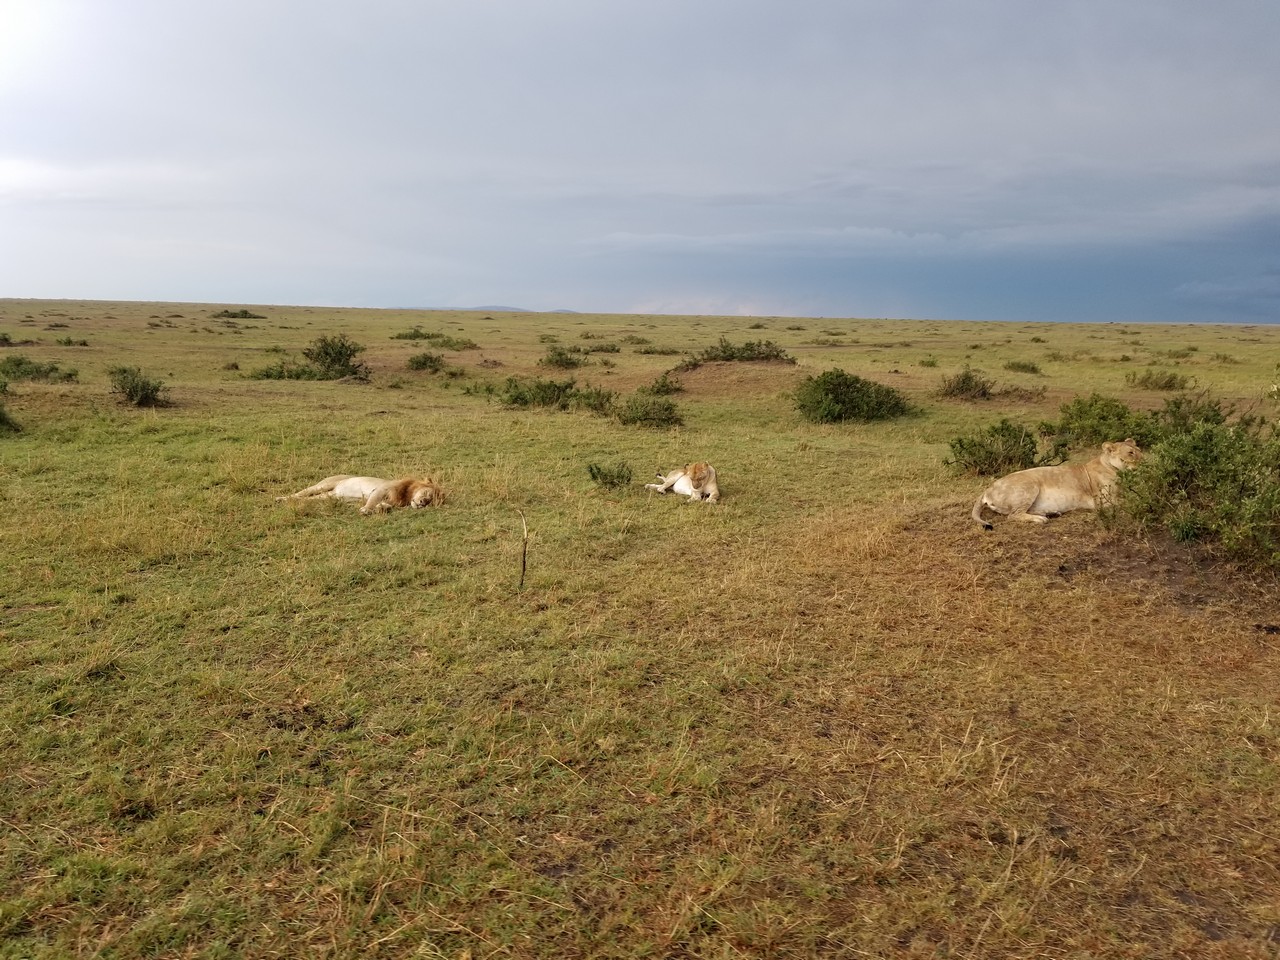 a group of lions lying in a grassy field